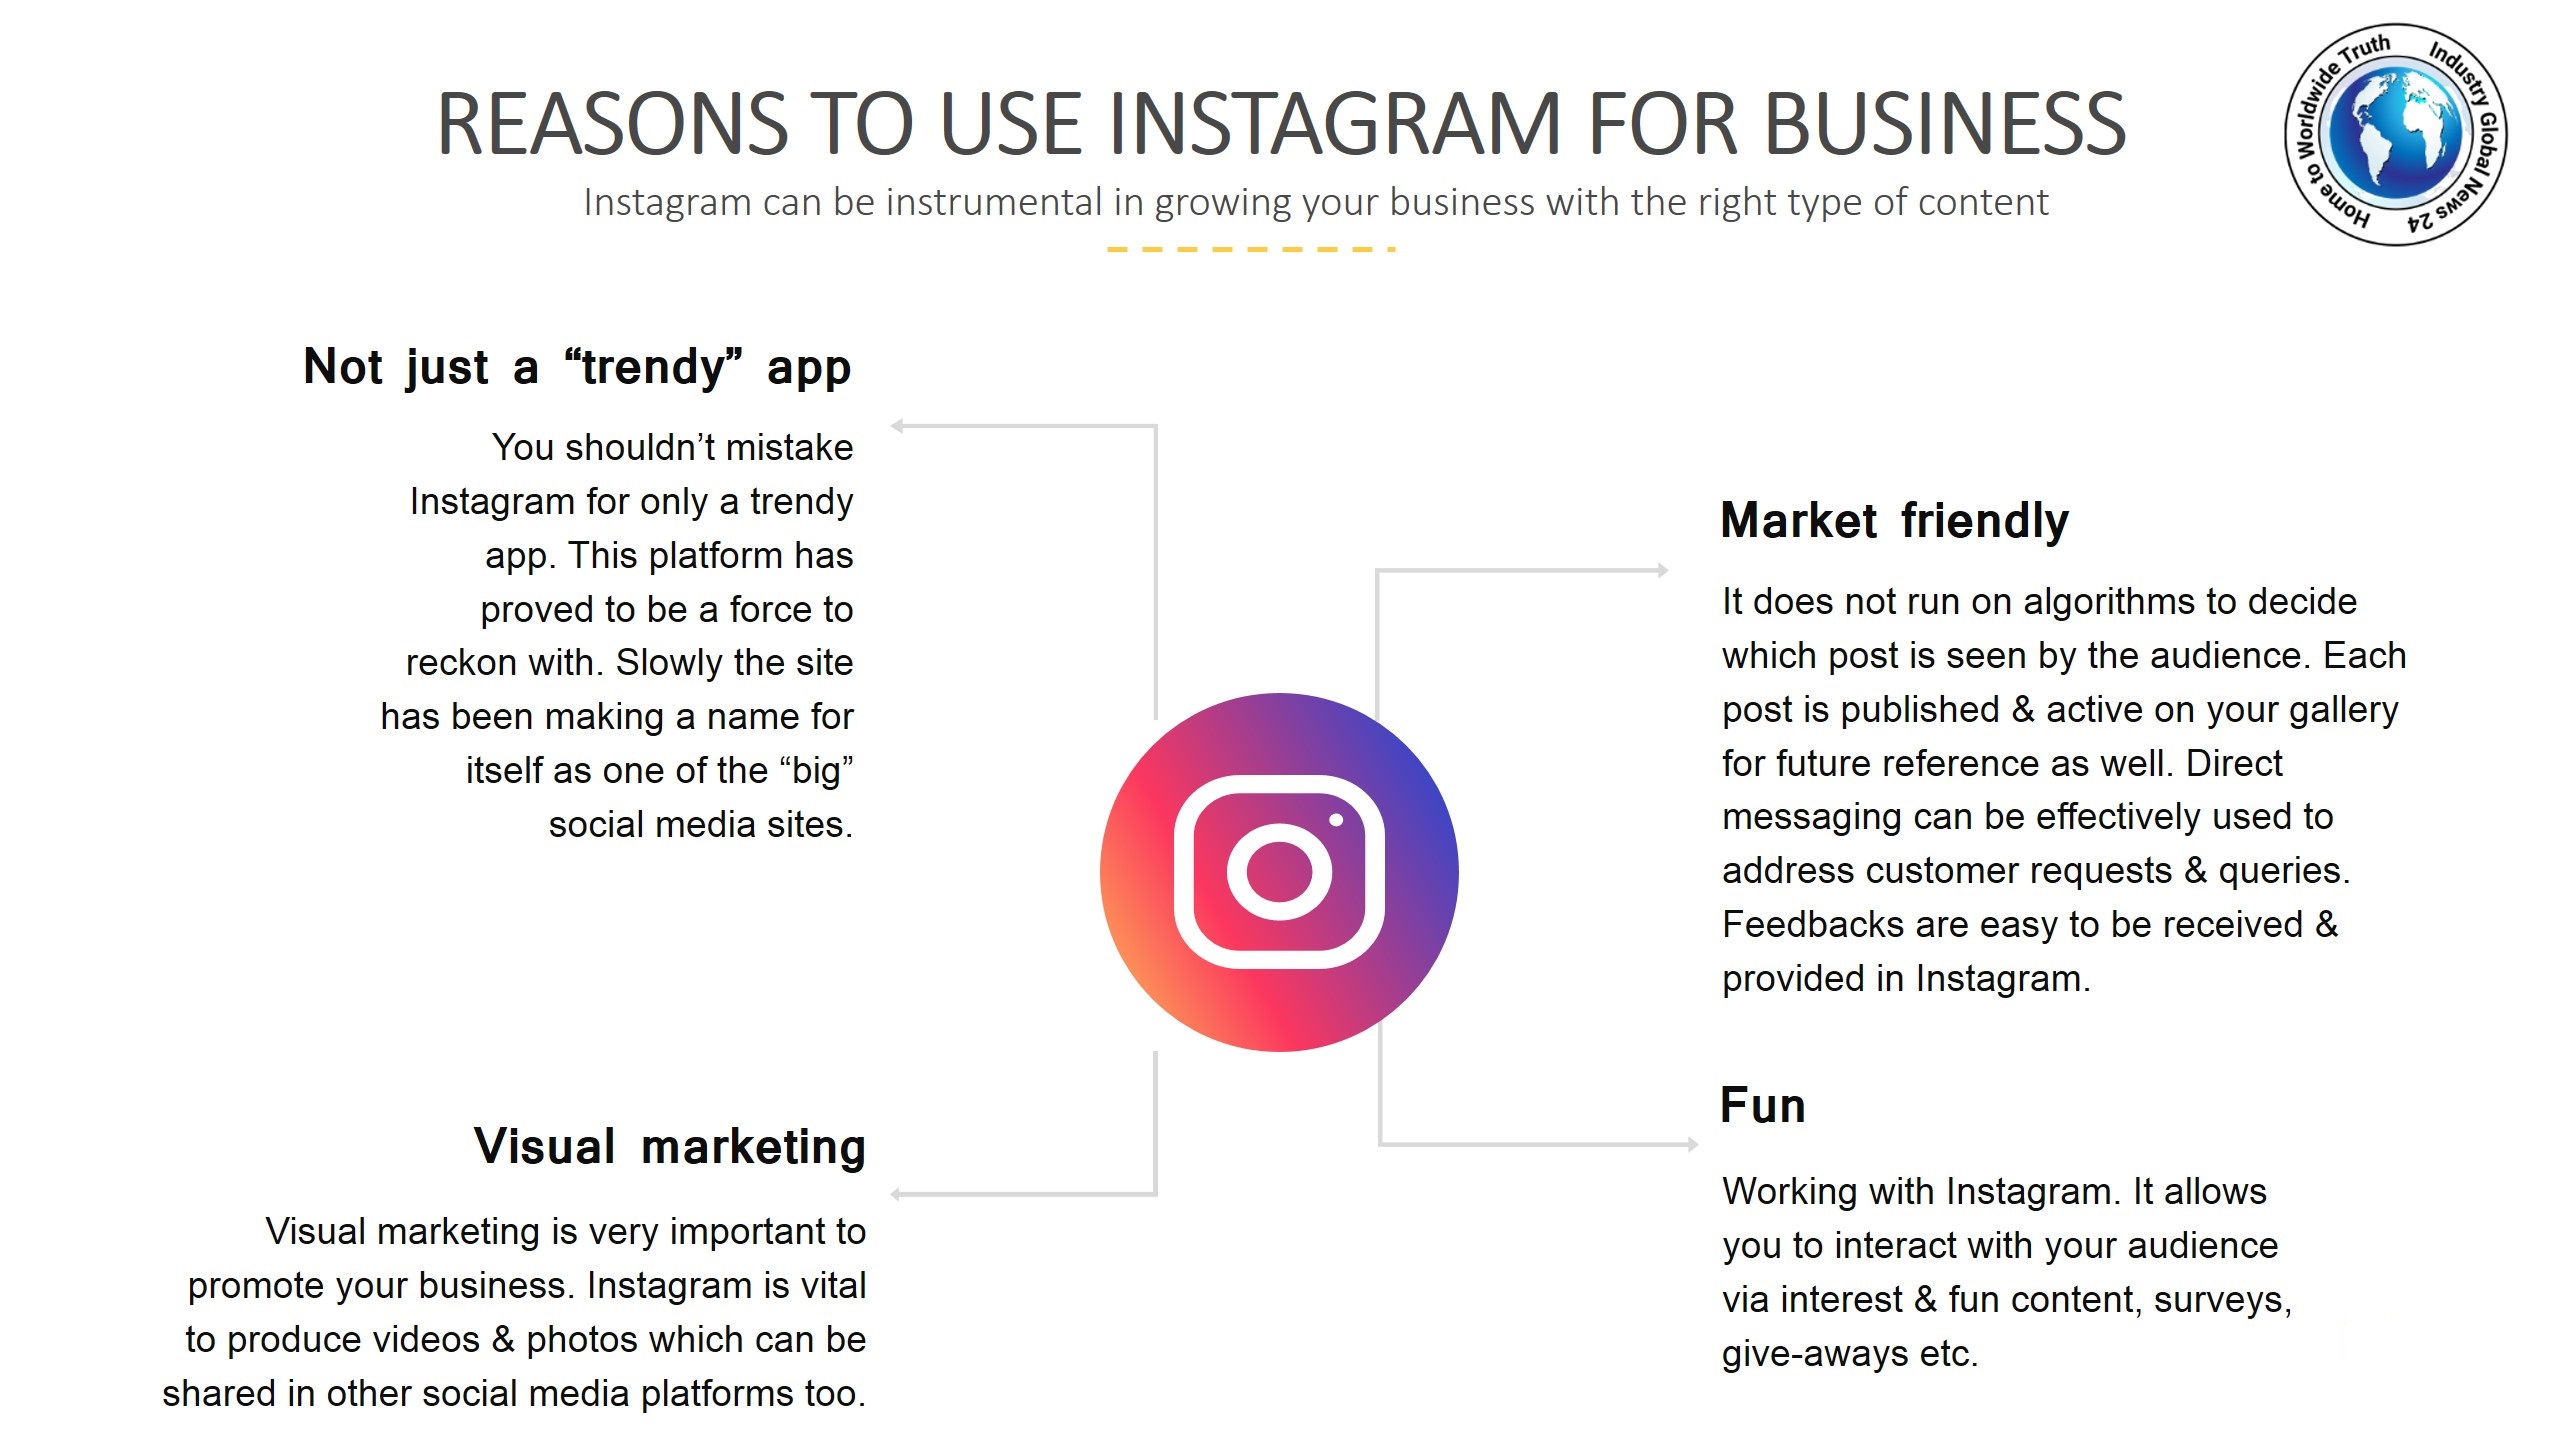 Reasons to use Instagram for business